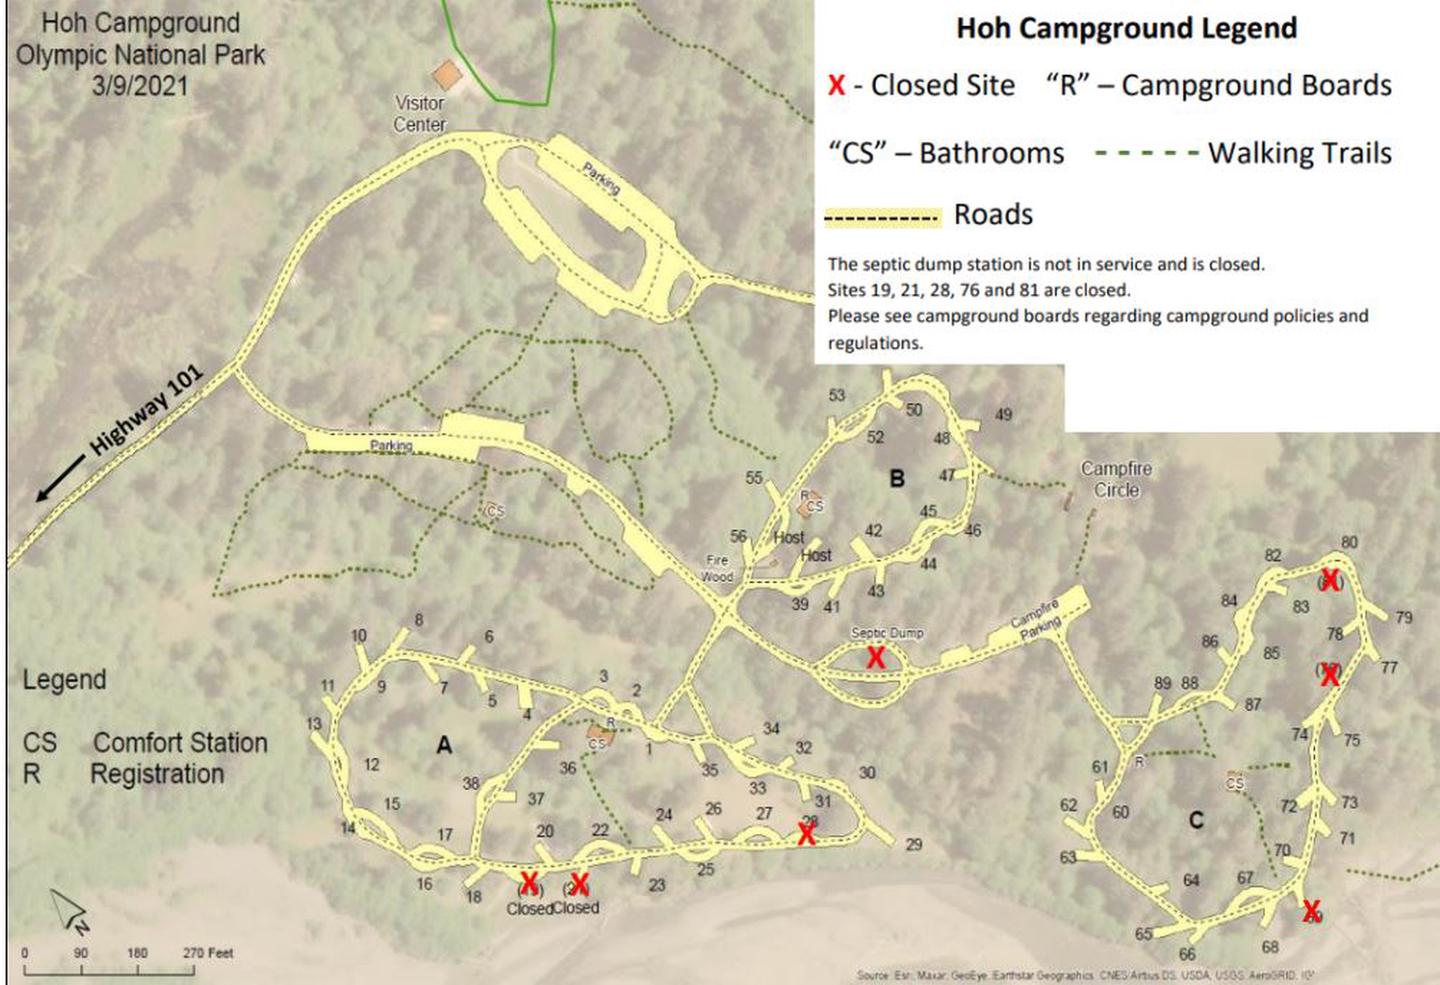 Hoh campground mapMap of Hoh Campground